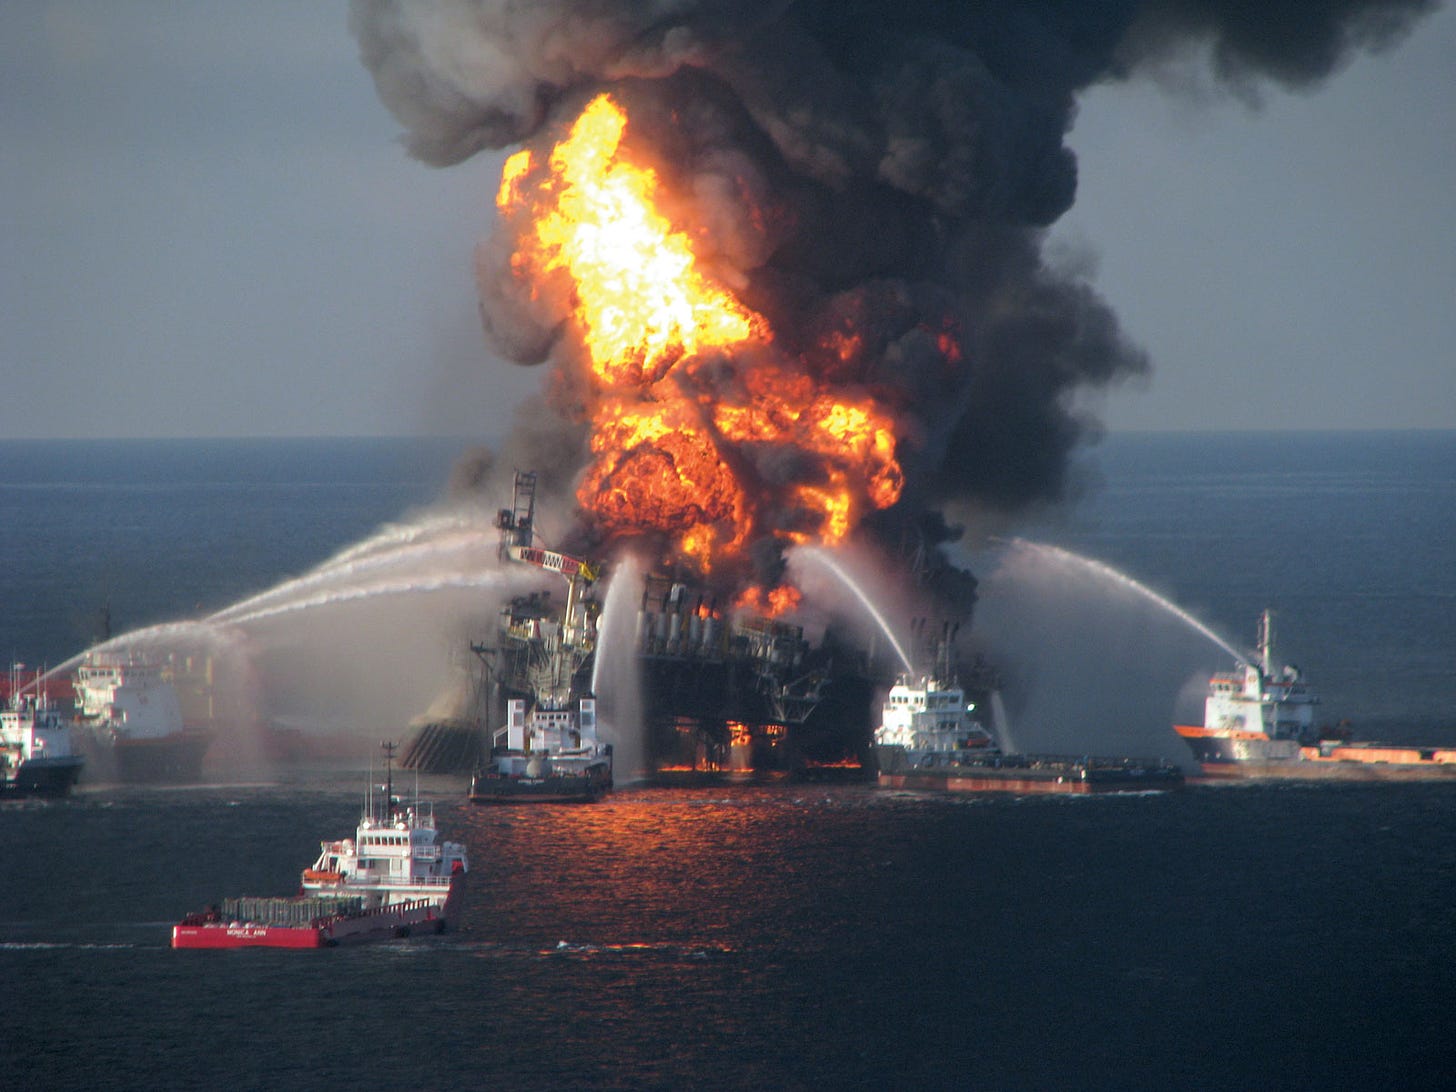 Deepwater Horizon oil spill | Summary, Effects, Cause, Clean Up, &amp; Facts |  Britannica